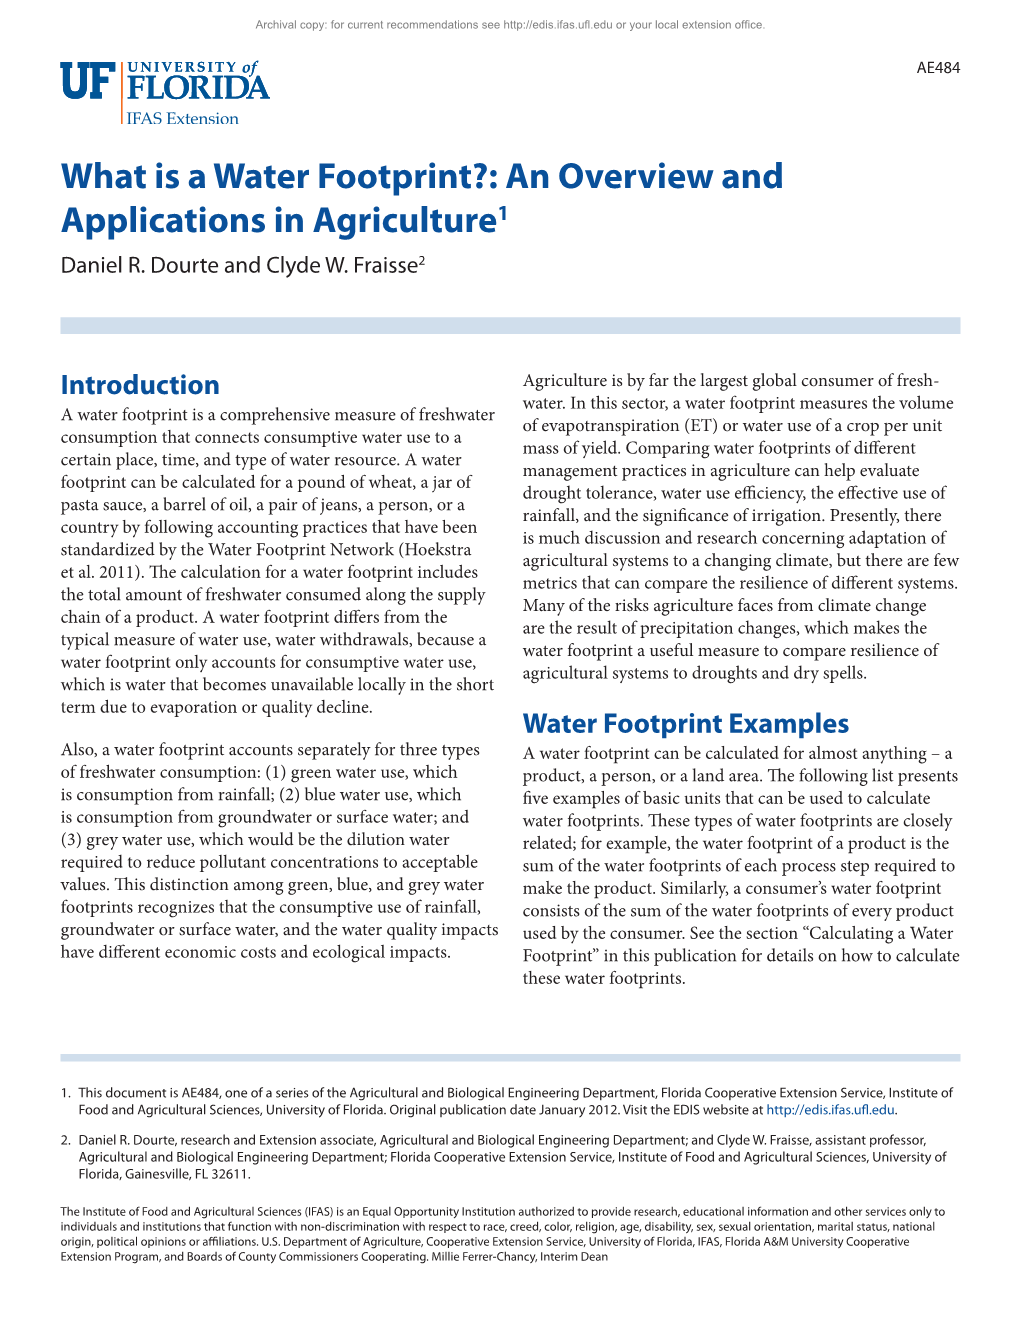 What Is a Water Footprint?: an Overview and Applications in Agriculture1 Daniel R